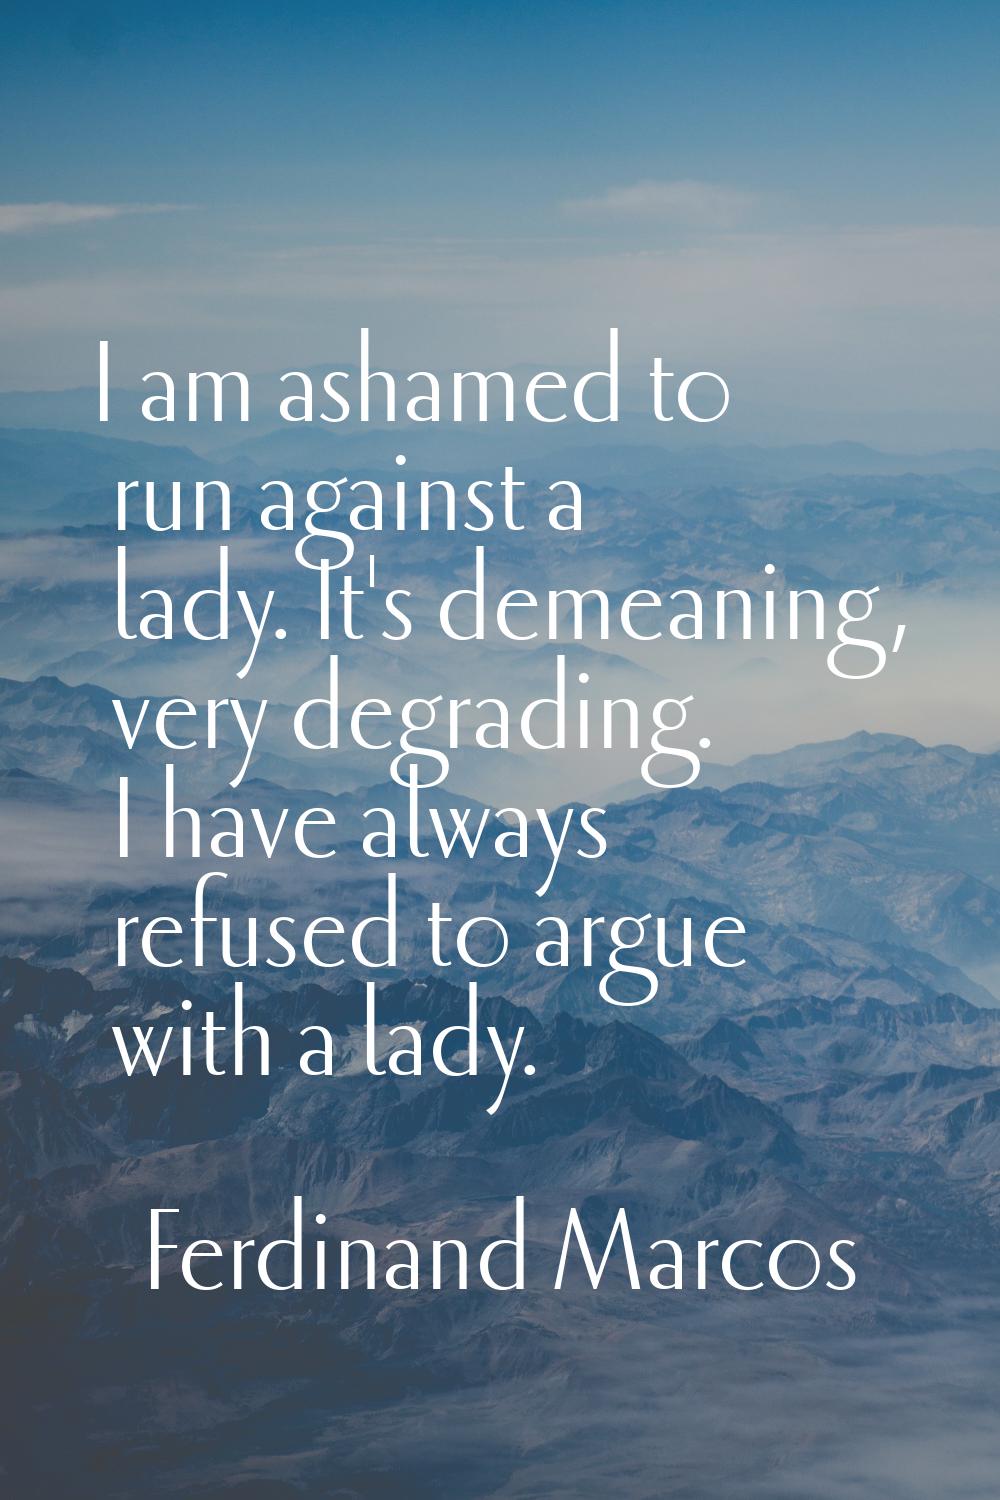 I am ashamed to run against a lady. It's demeaning, very degrading. I have always refused to argue 